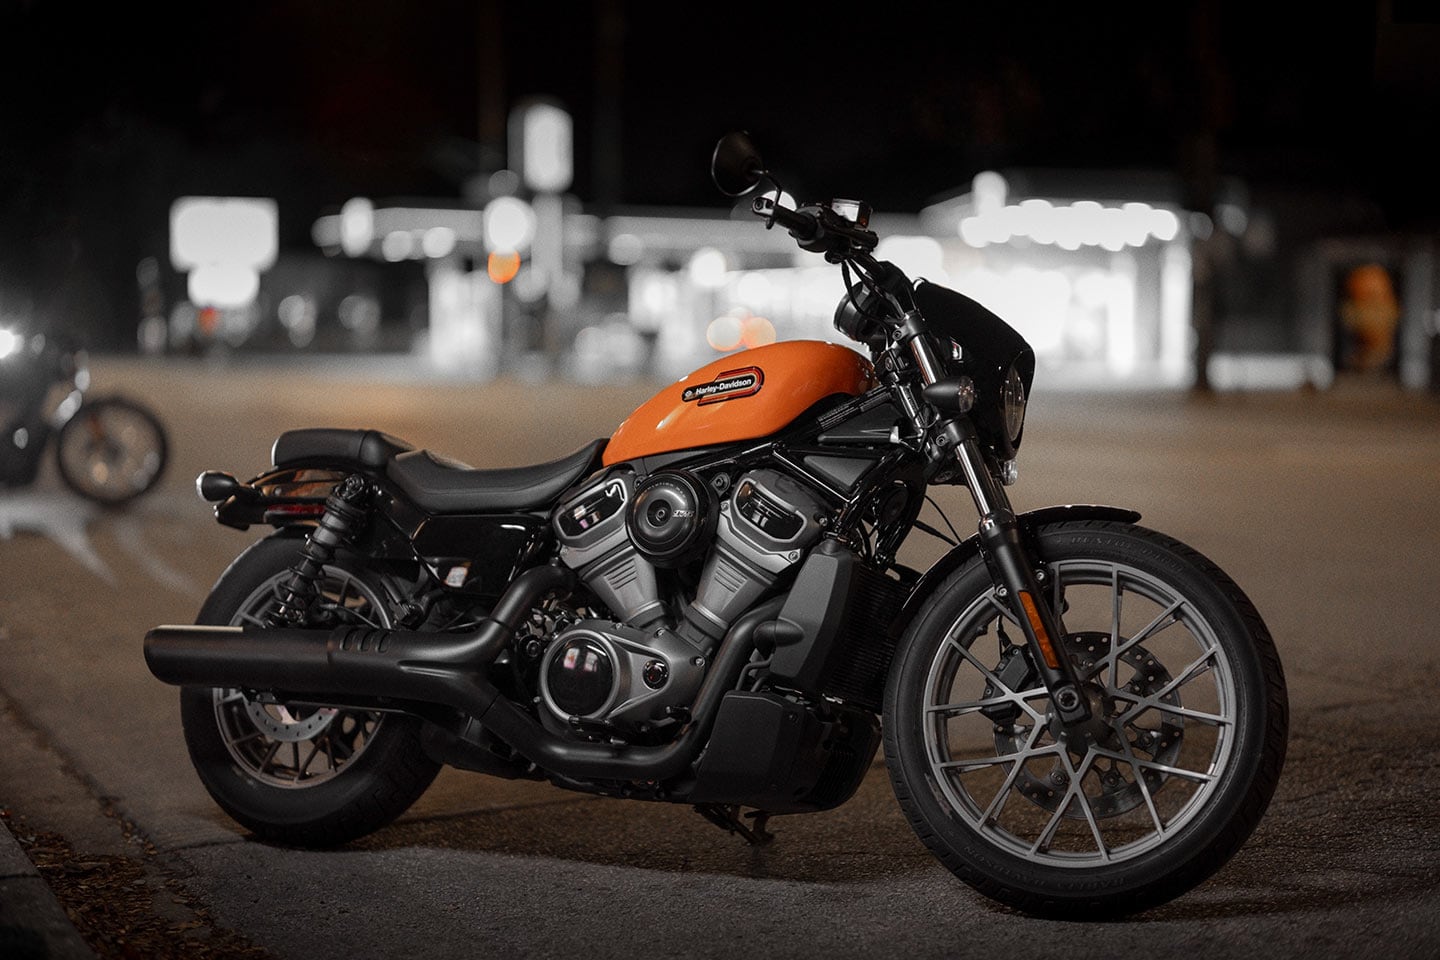 The Nightster Special in Baja Orange. Both models have three ride modes and ABS.